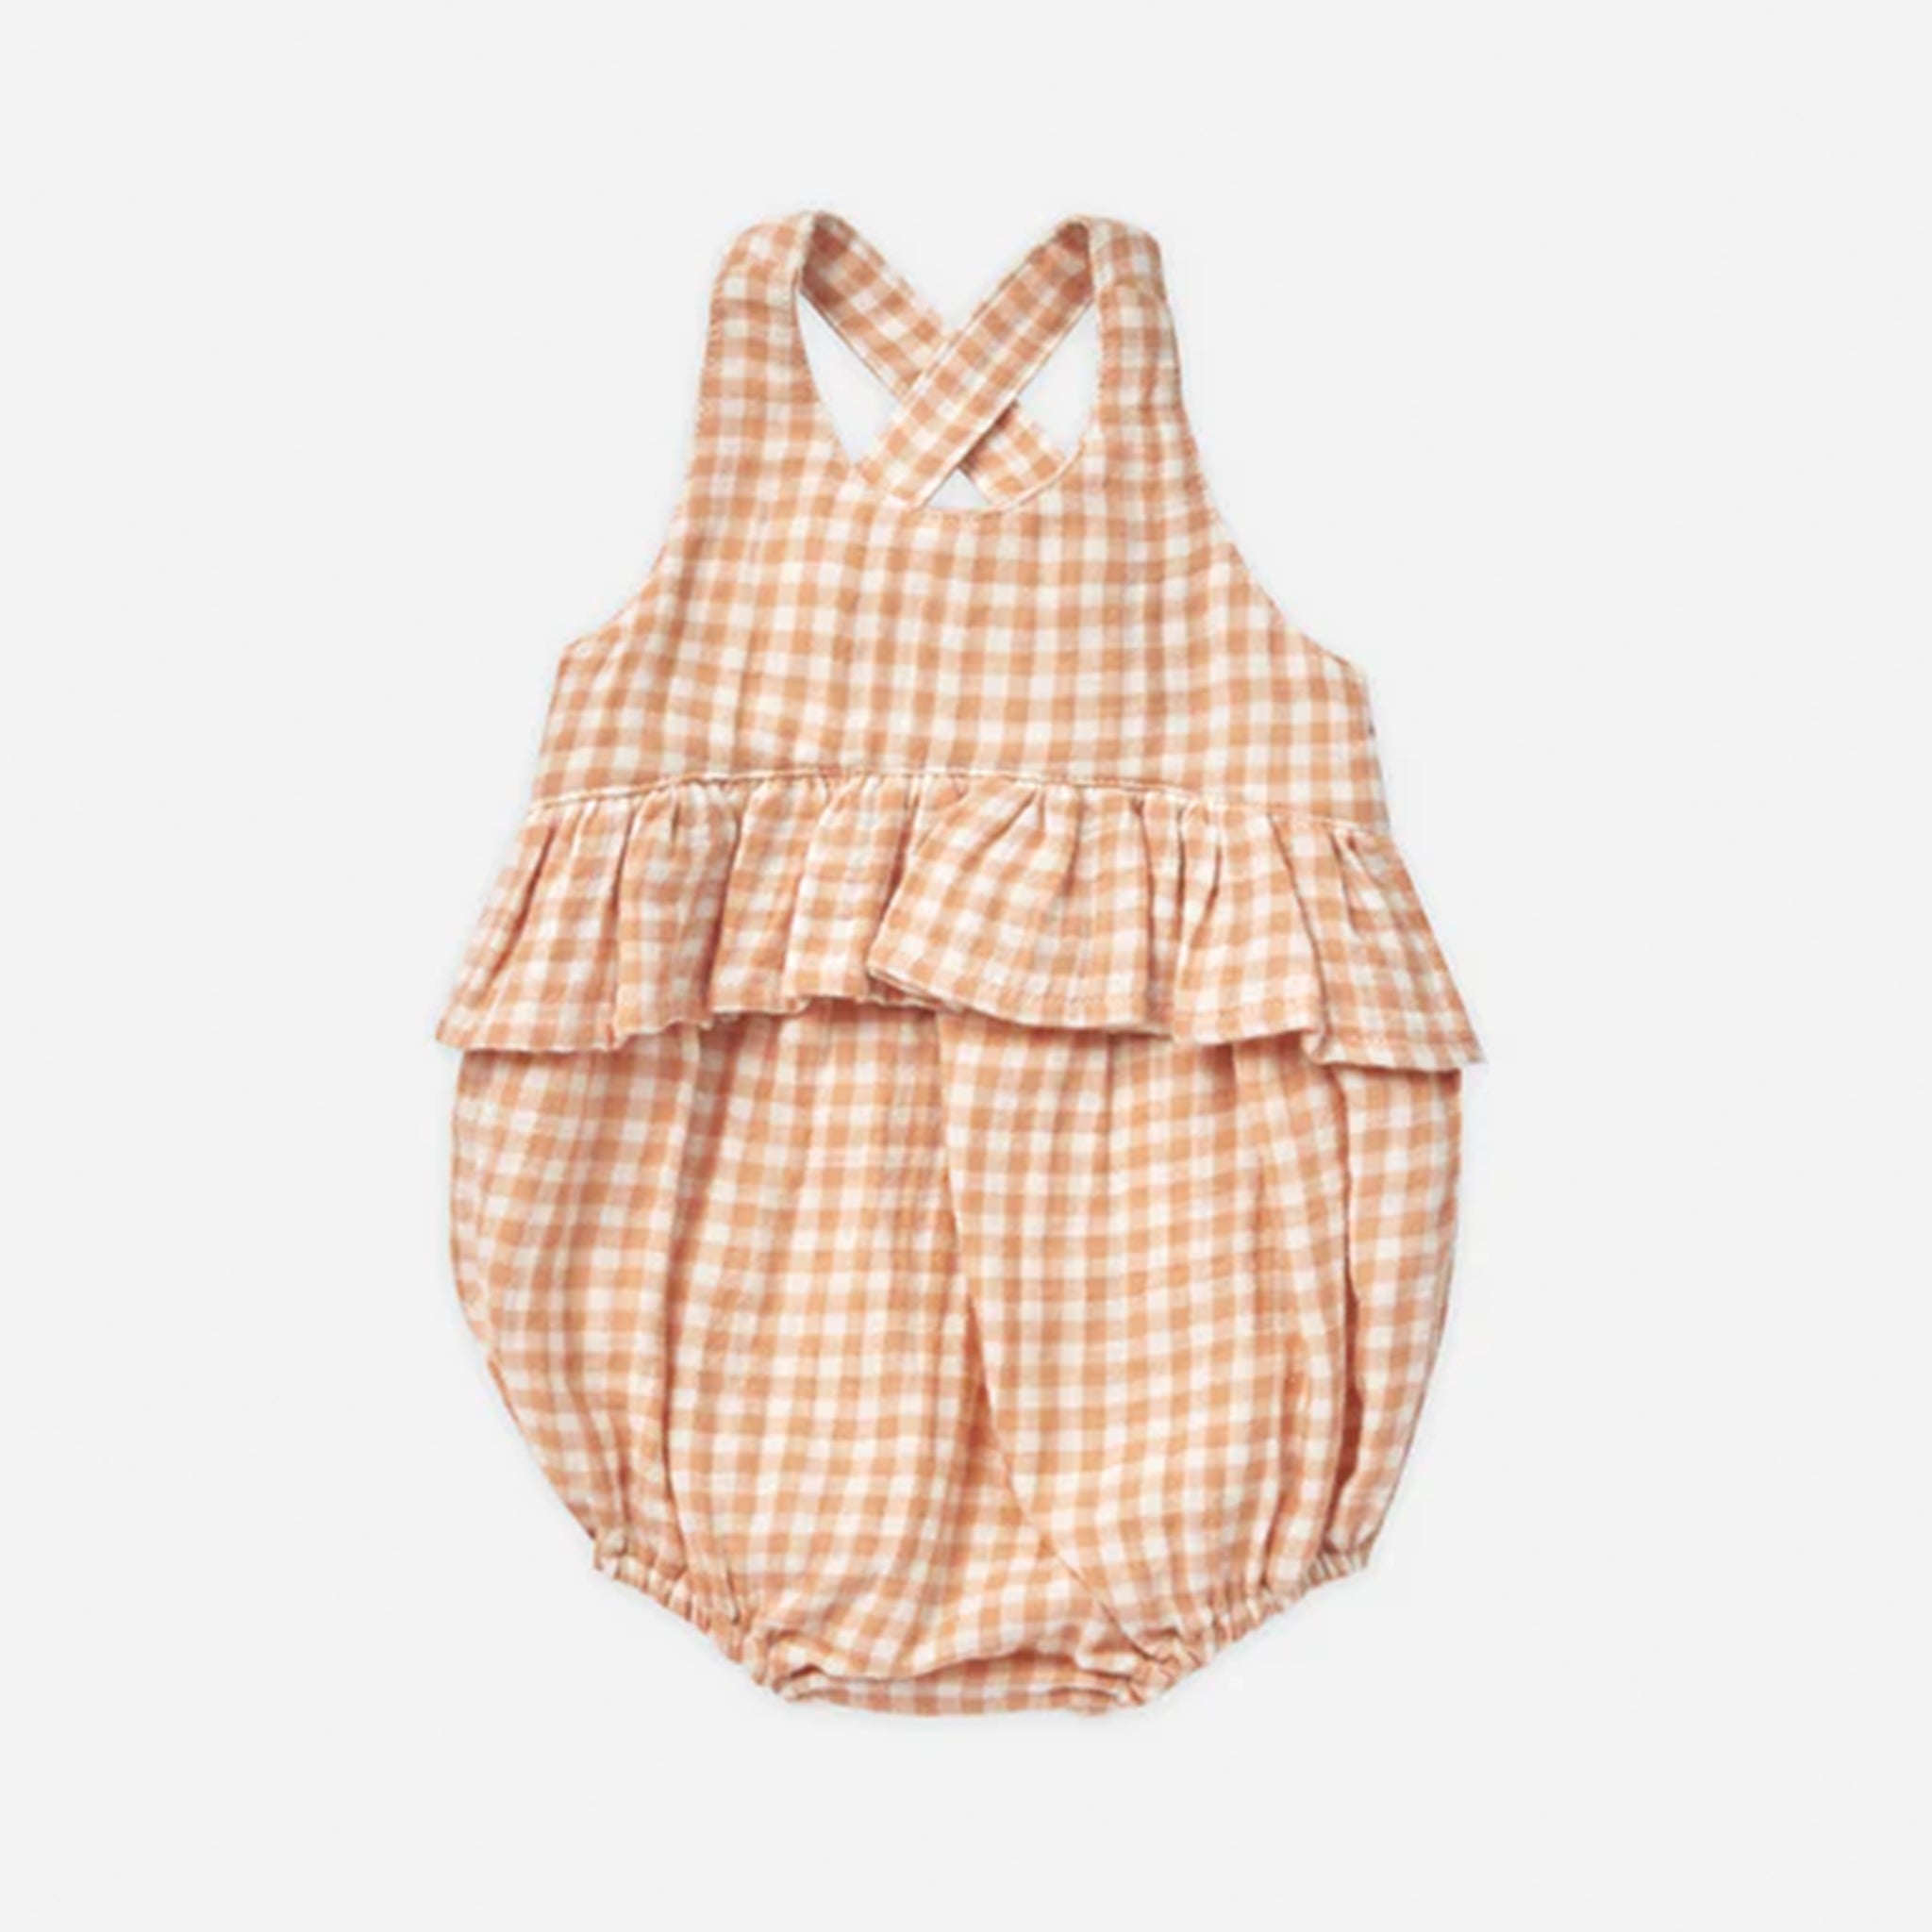 An ivory and light orange one piece children&#39;s romper with a criss cross detail on the back and snap closures on the bottom for easy changing.